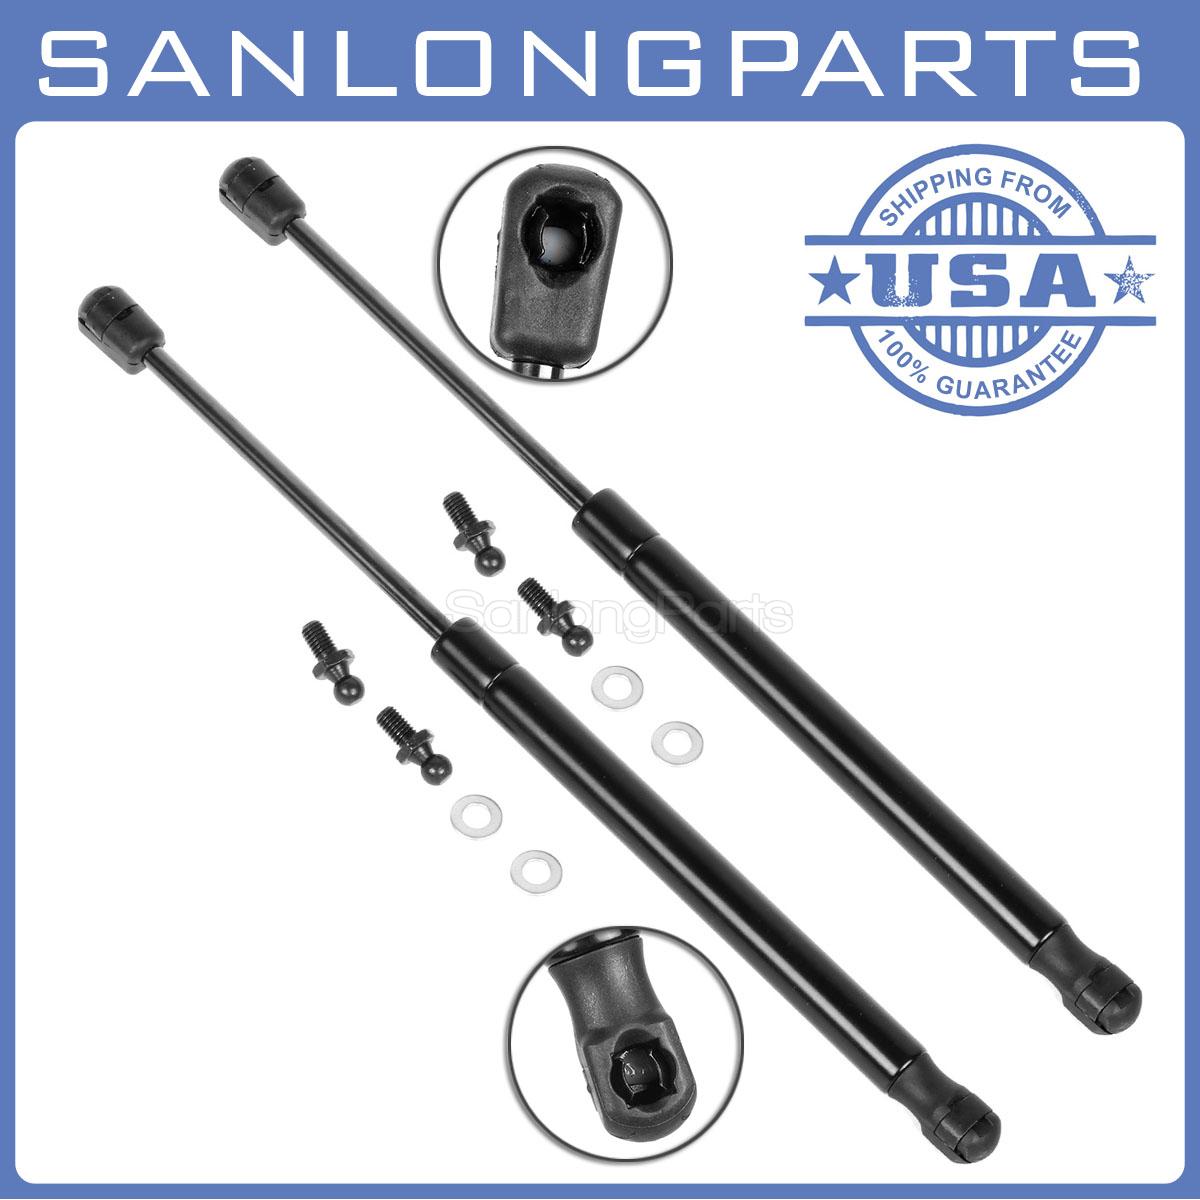 2 Front Hood Lift Supports  Struts Shocks Spring For 04-06 PONTIAC GTO Qty